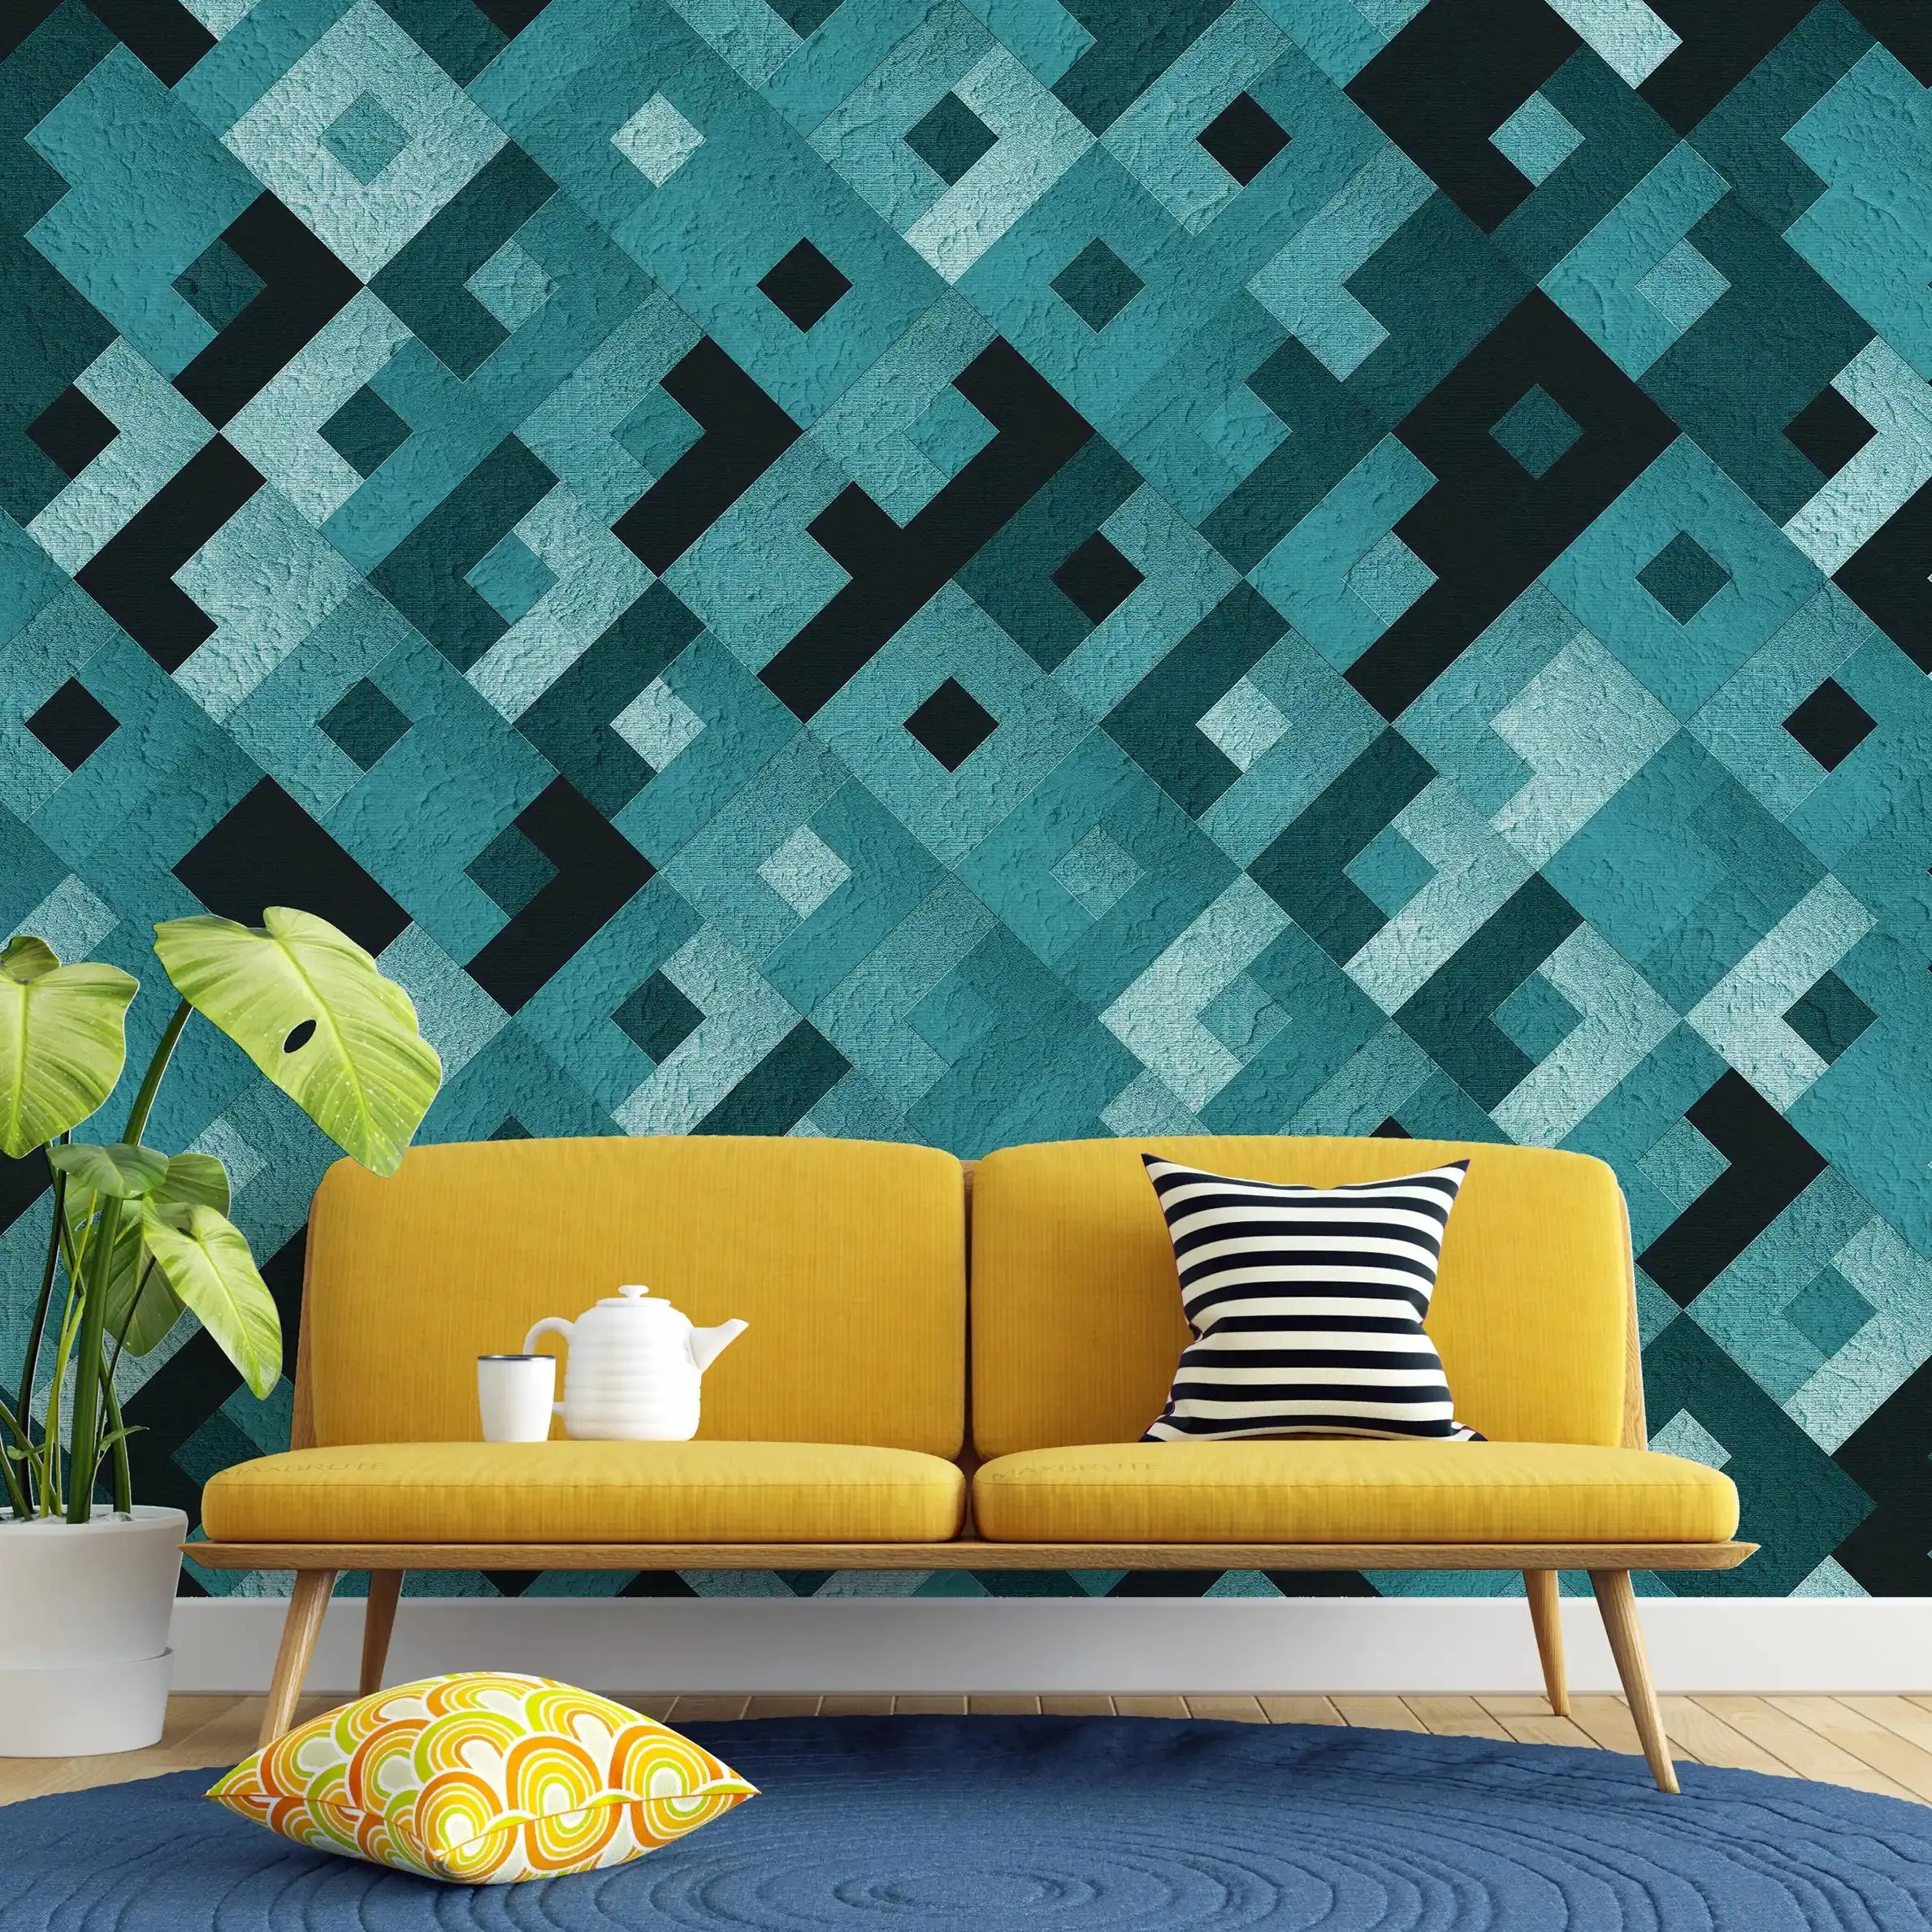 3064-D / Colorful Geometric Pattern Wallpaper - Peelable, Stickable, Ideal for Modern Wall Decor or Accent Wall - Artevella